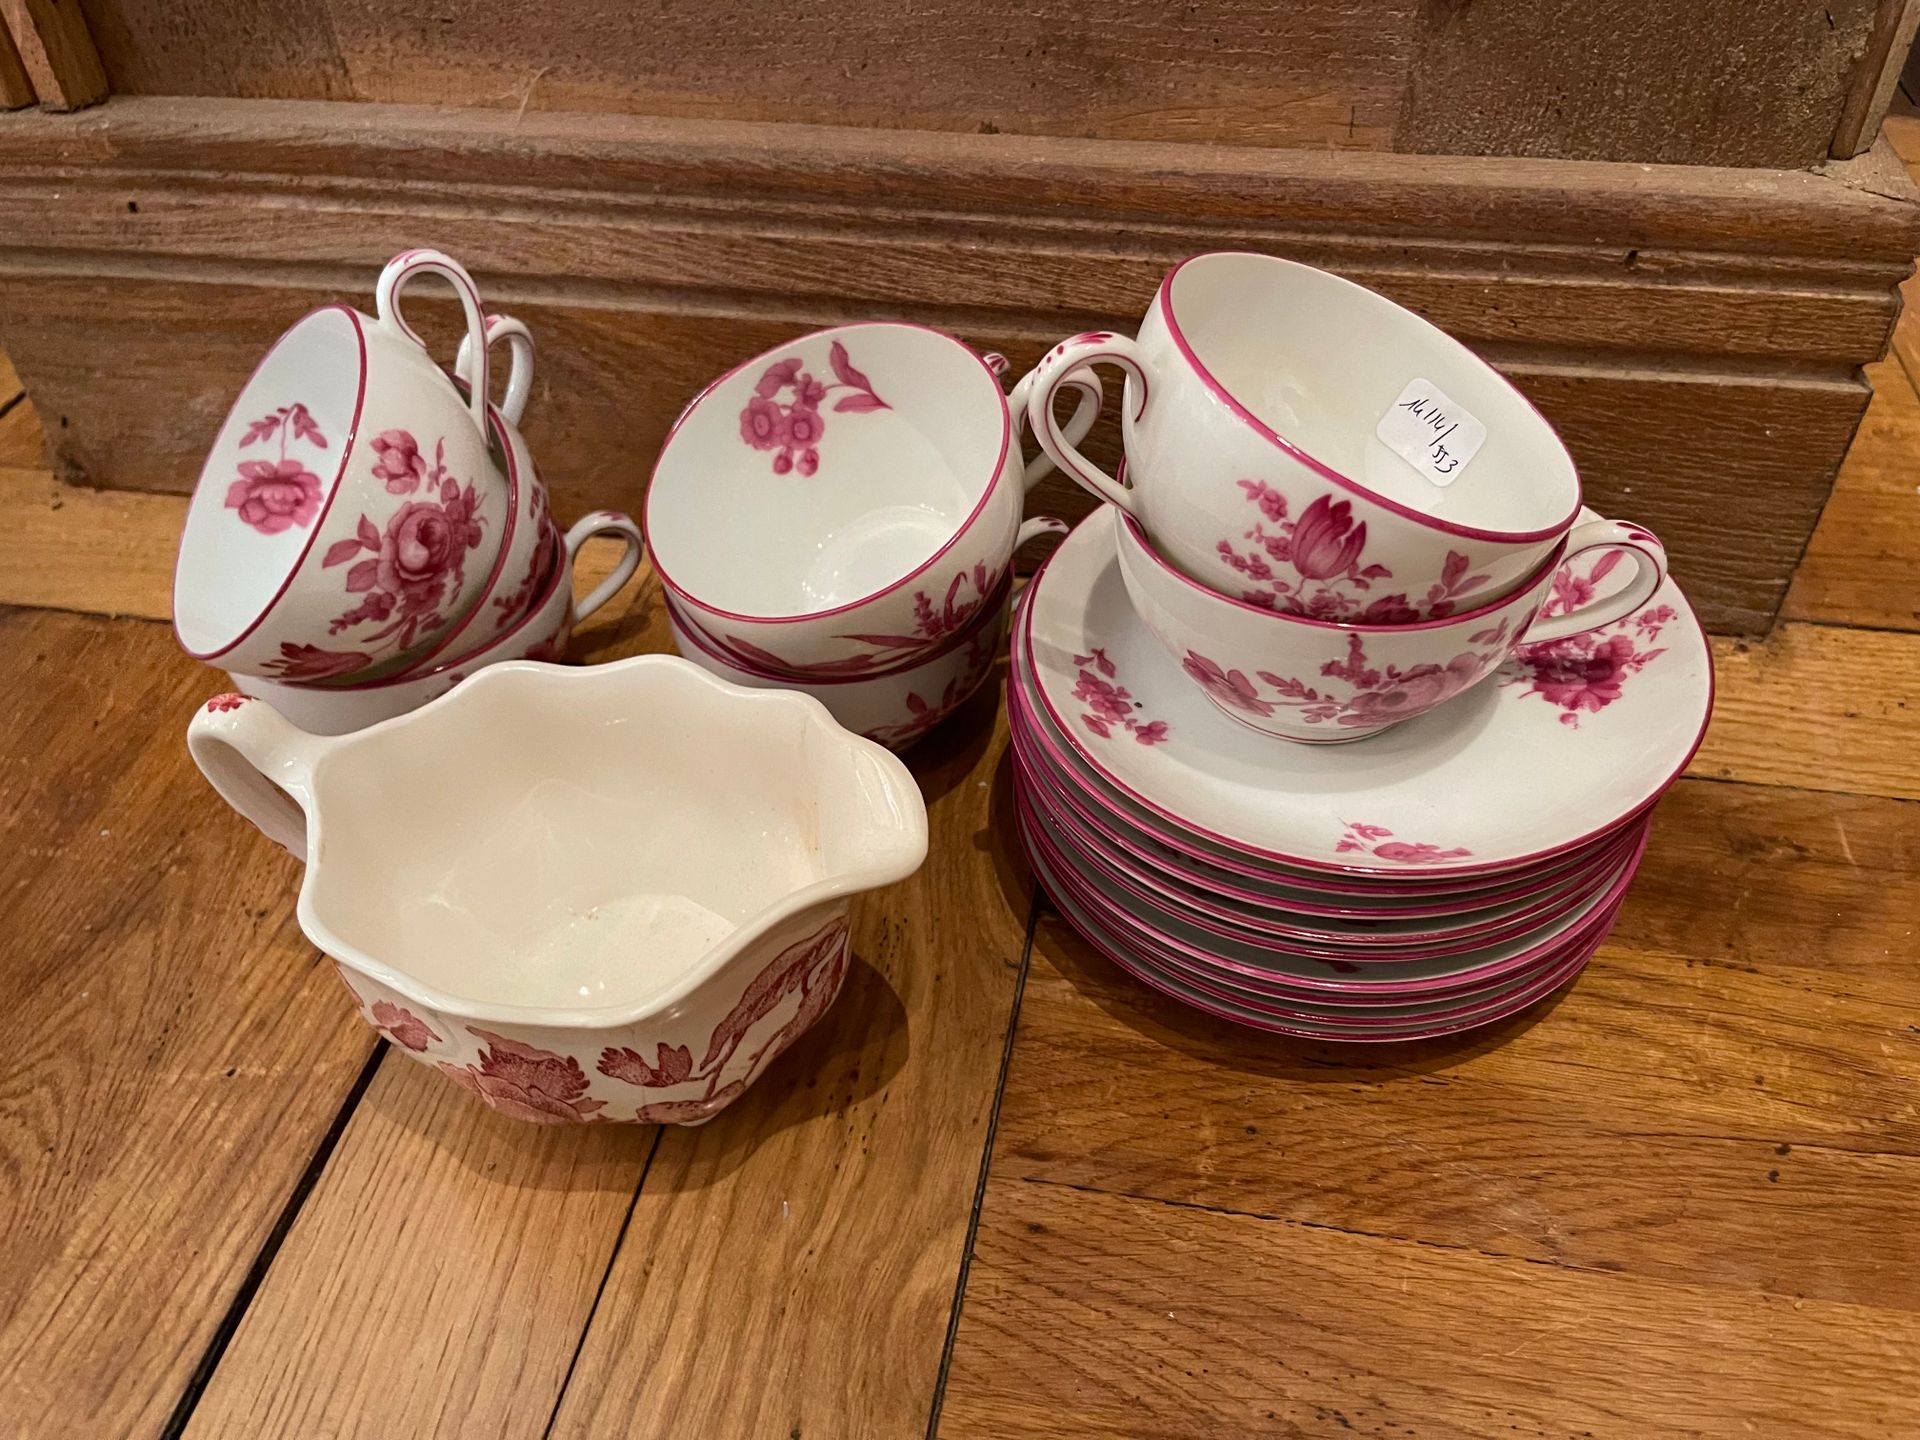 Null Parts of tea-coffee sets with pink flowers.